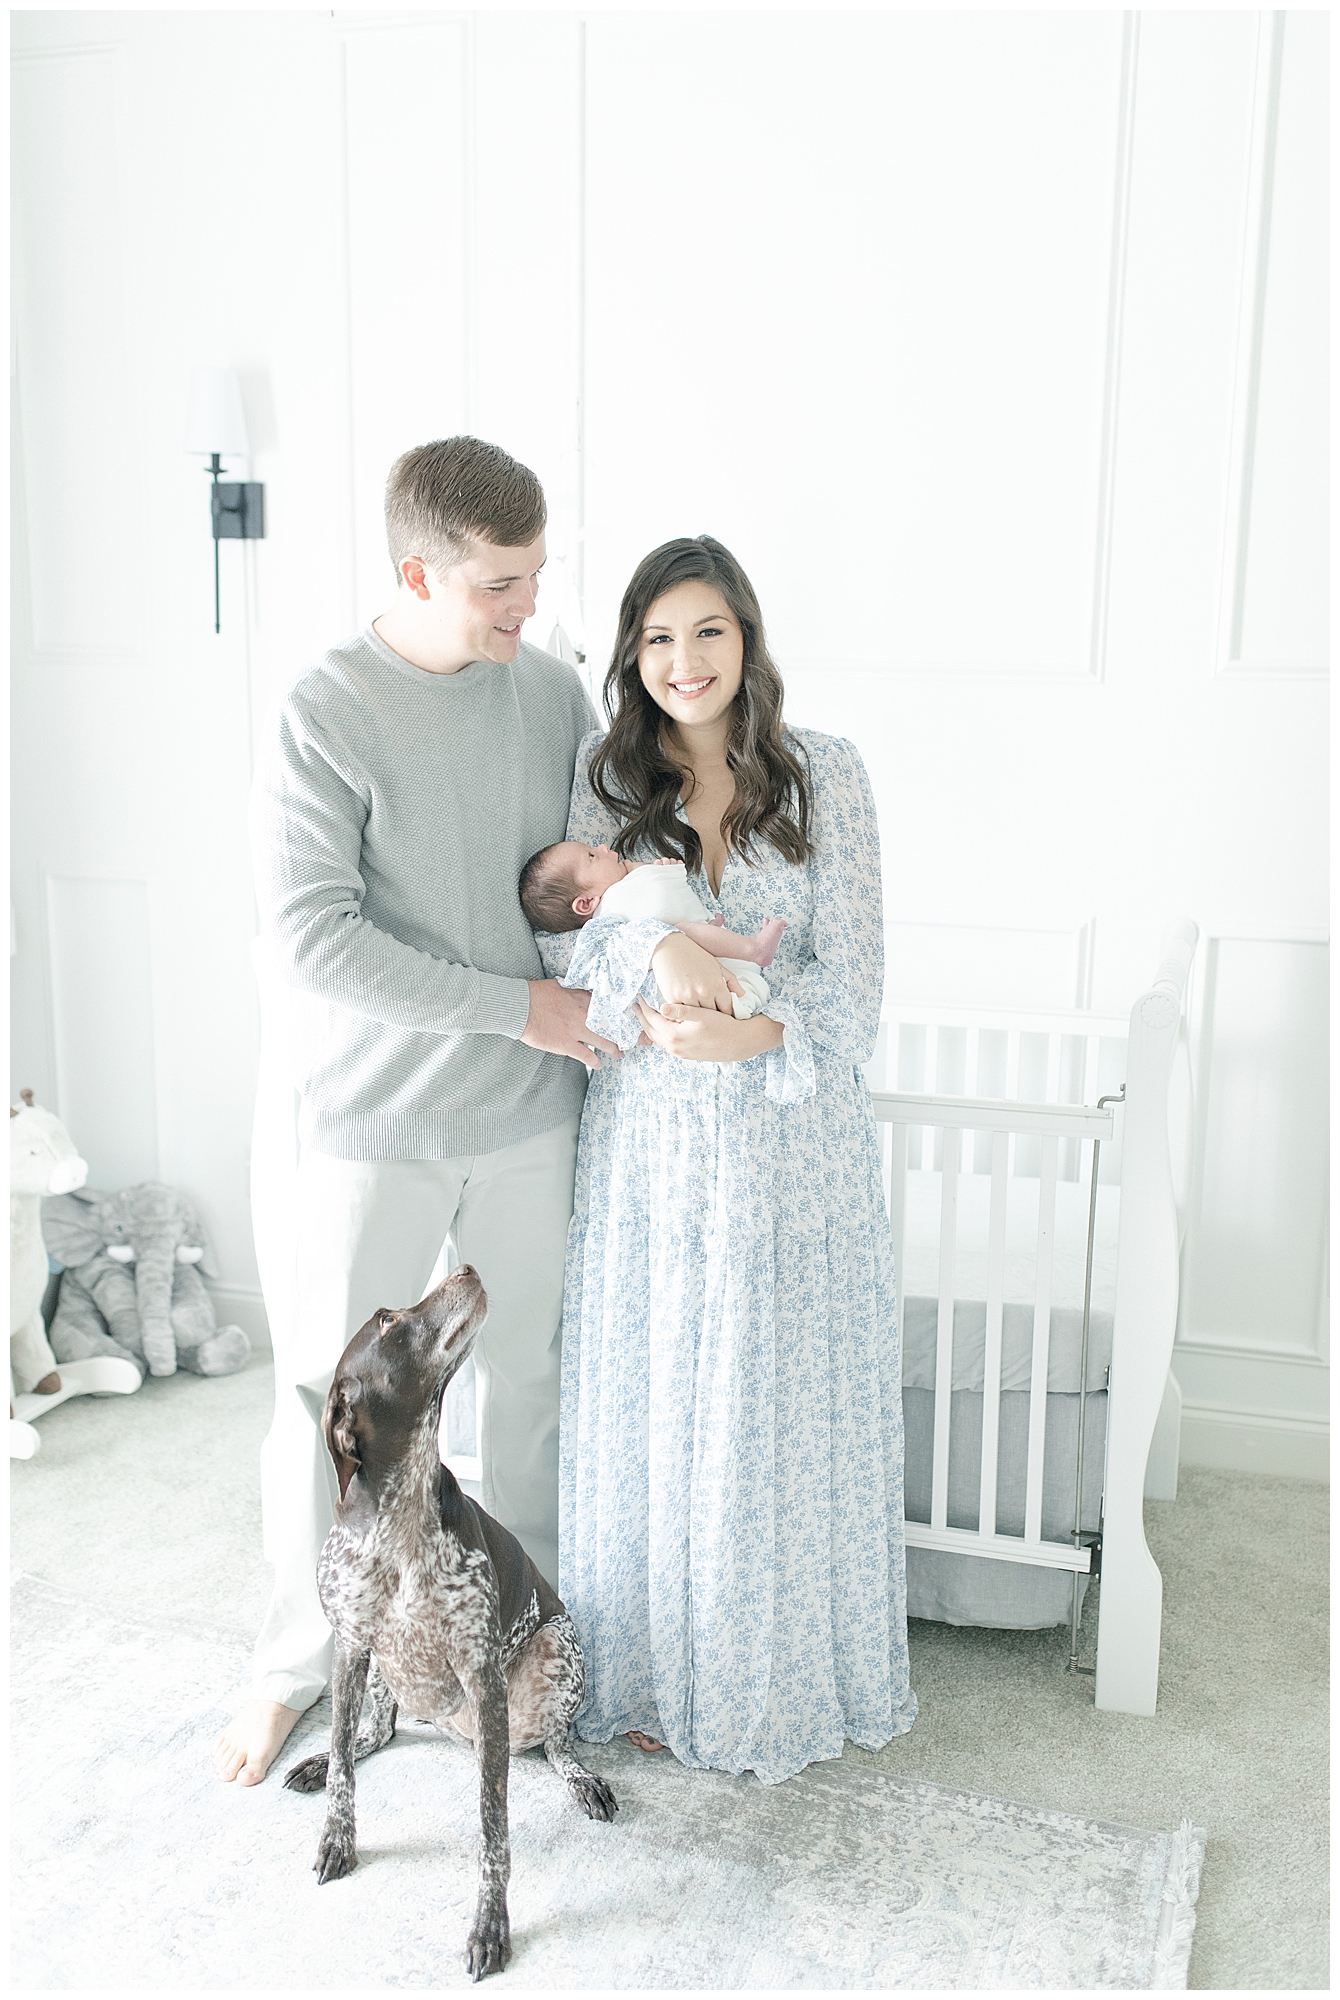 Family photo with their pet. Photo by Little Sunshine Photography.